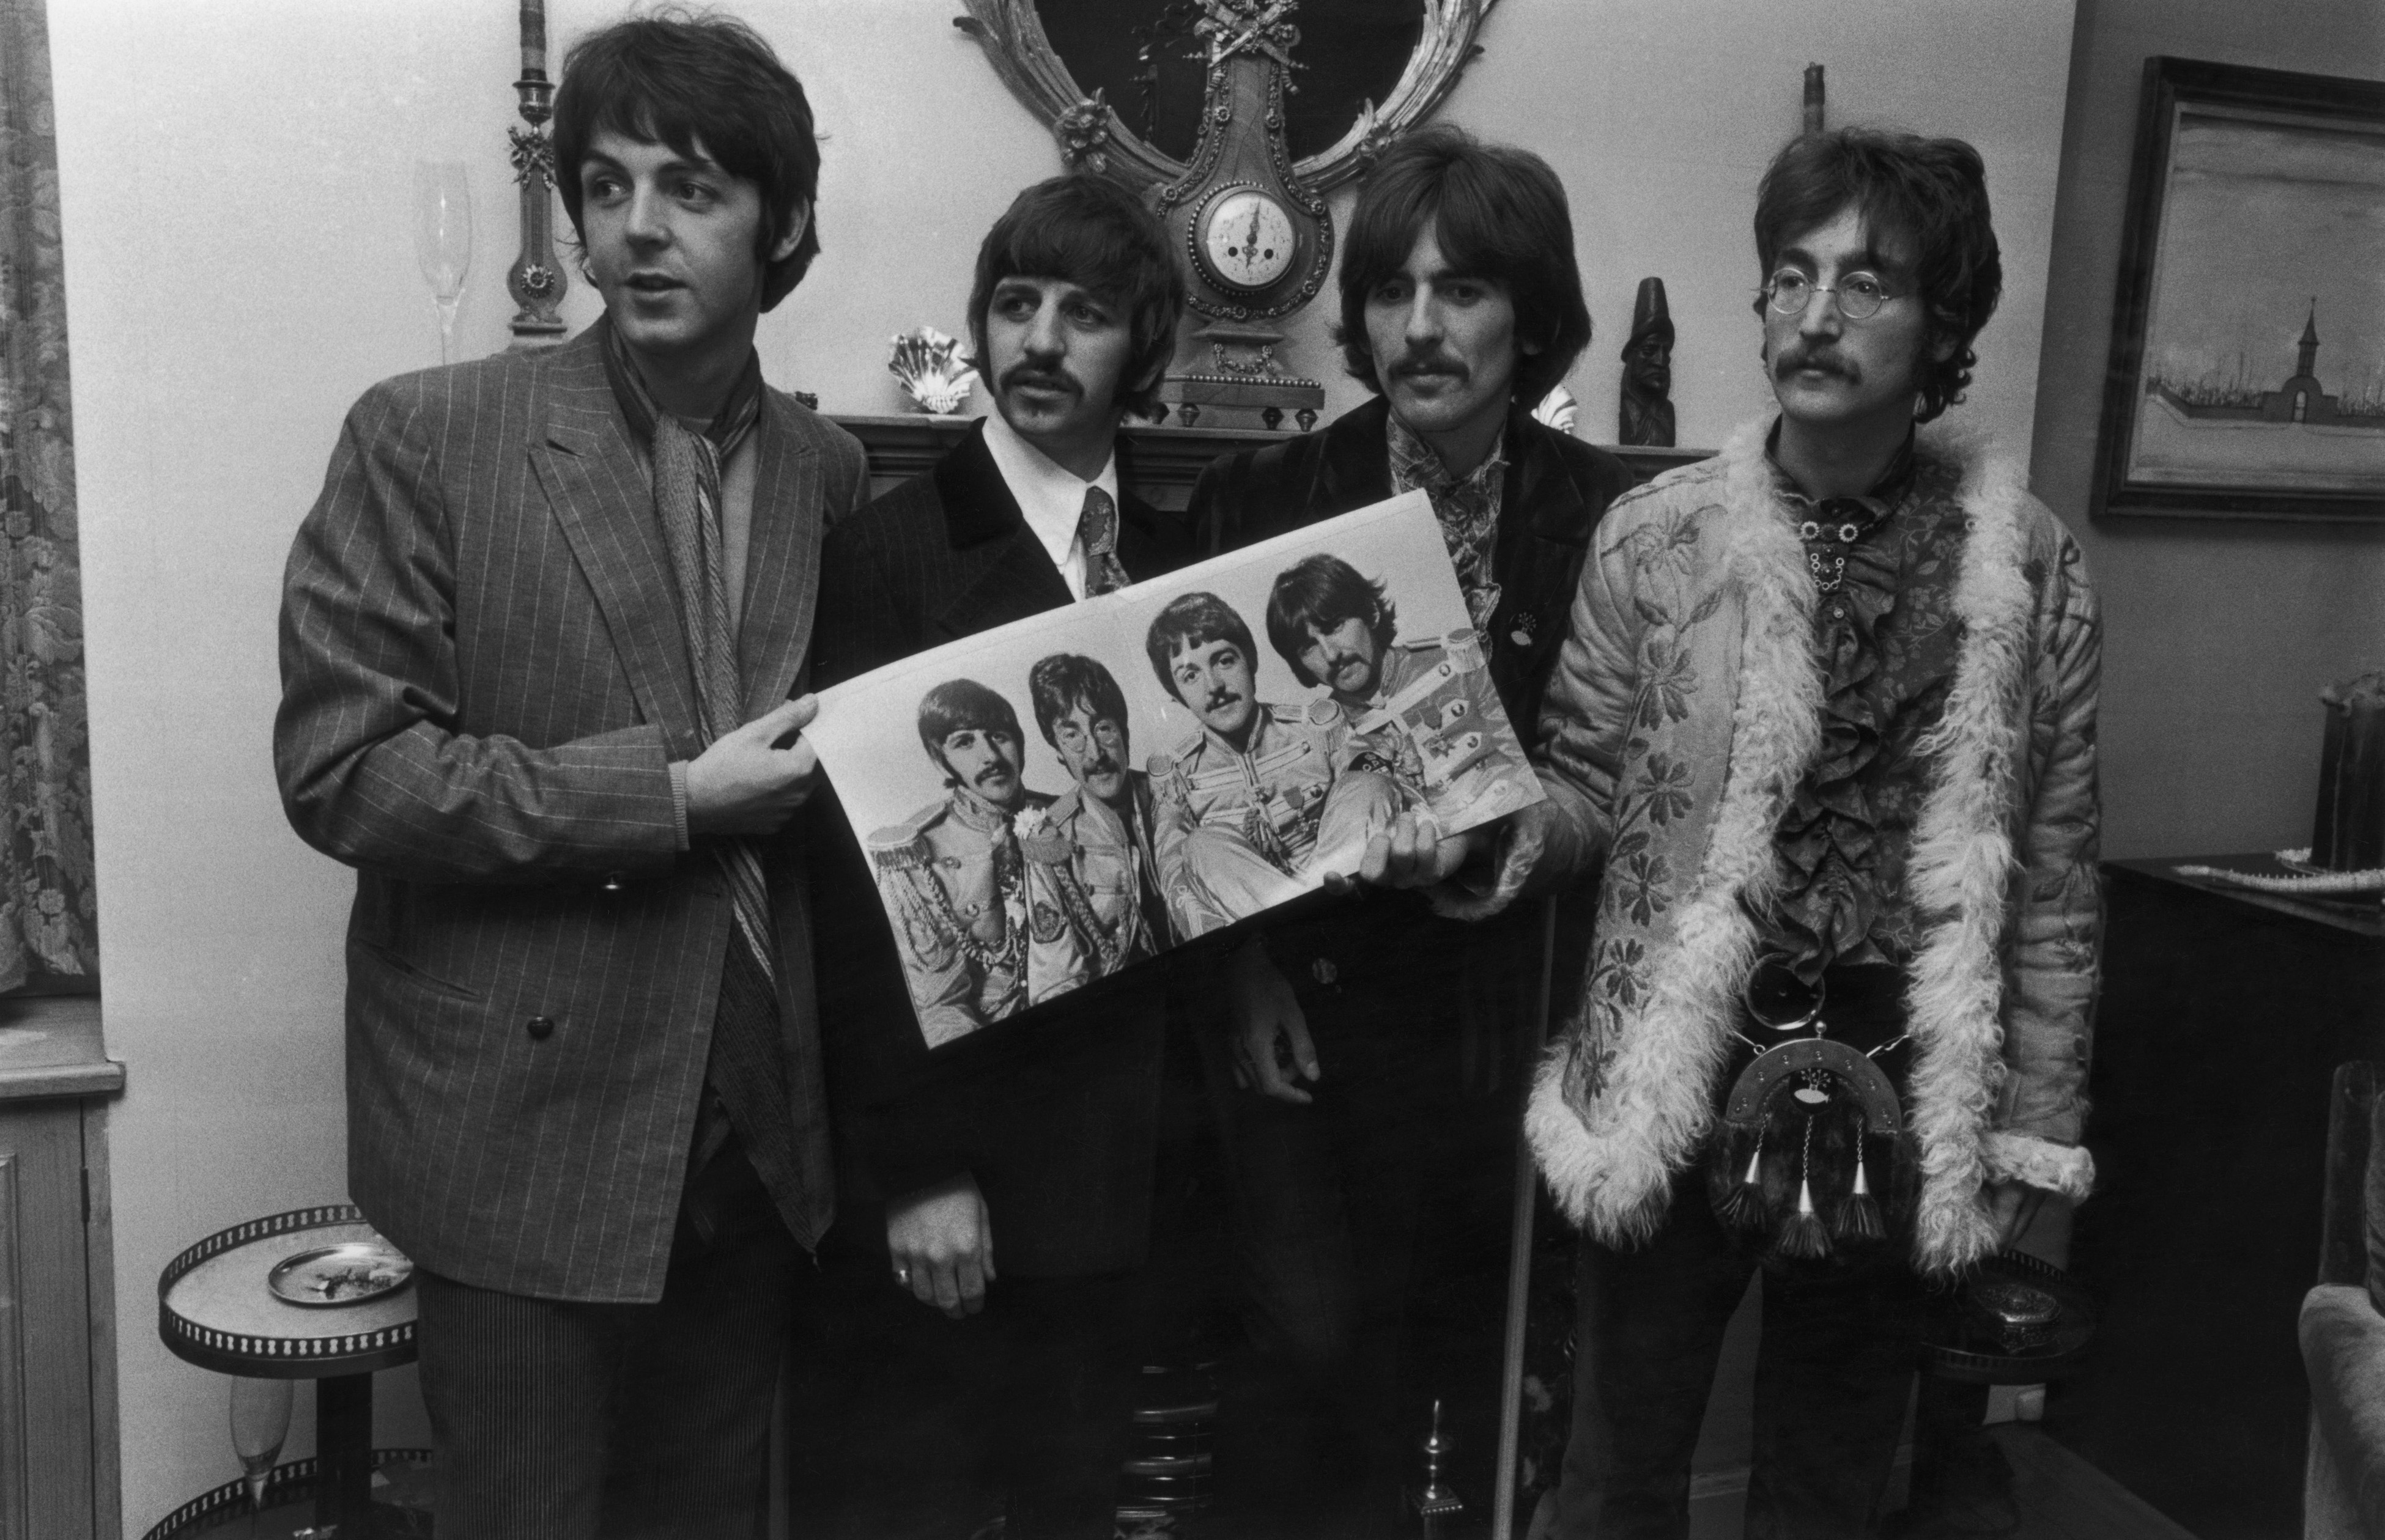 Paul McCartney, Ringo Starr, George Harrison, and John Lennon of the Beatles at a photocall for 'Sergeant Pepper's Lonely Hearts Club Band'